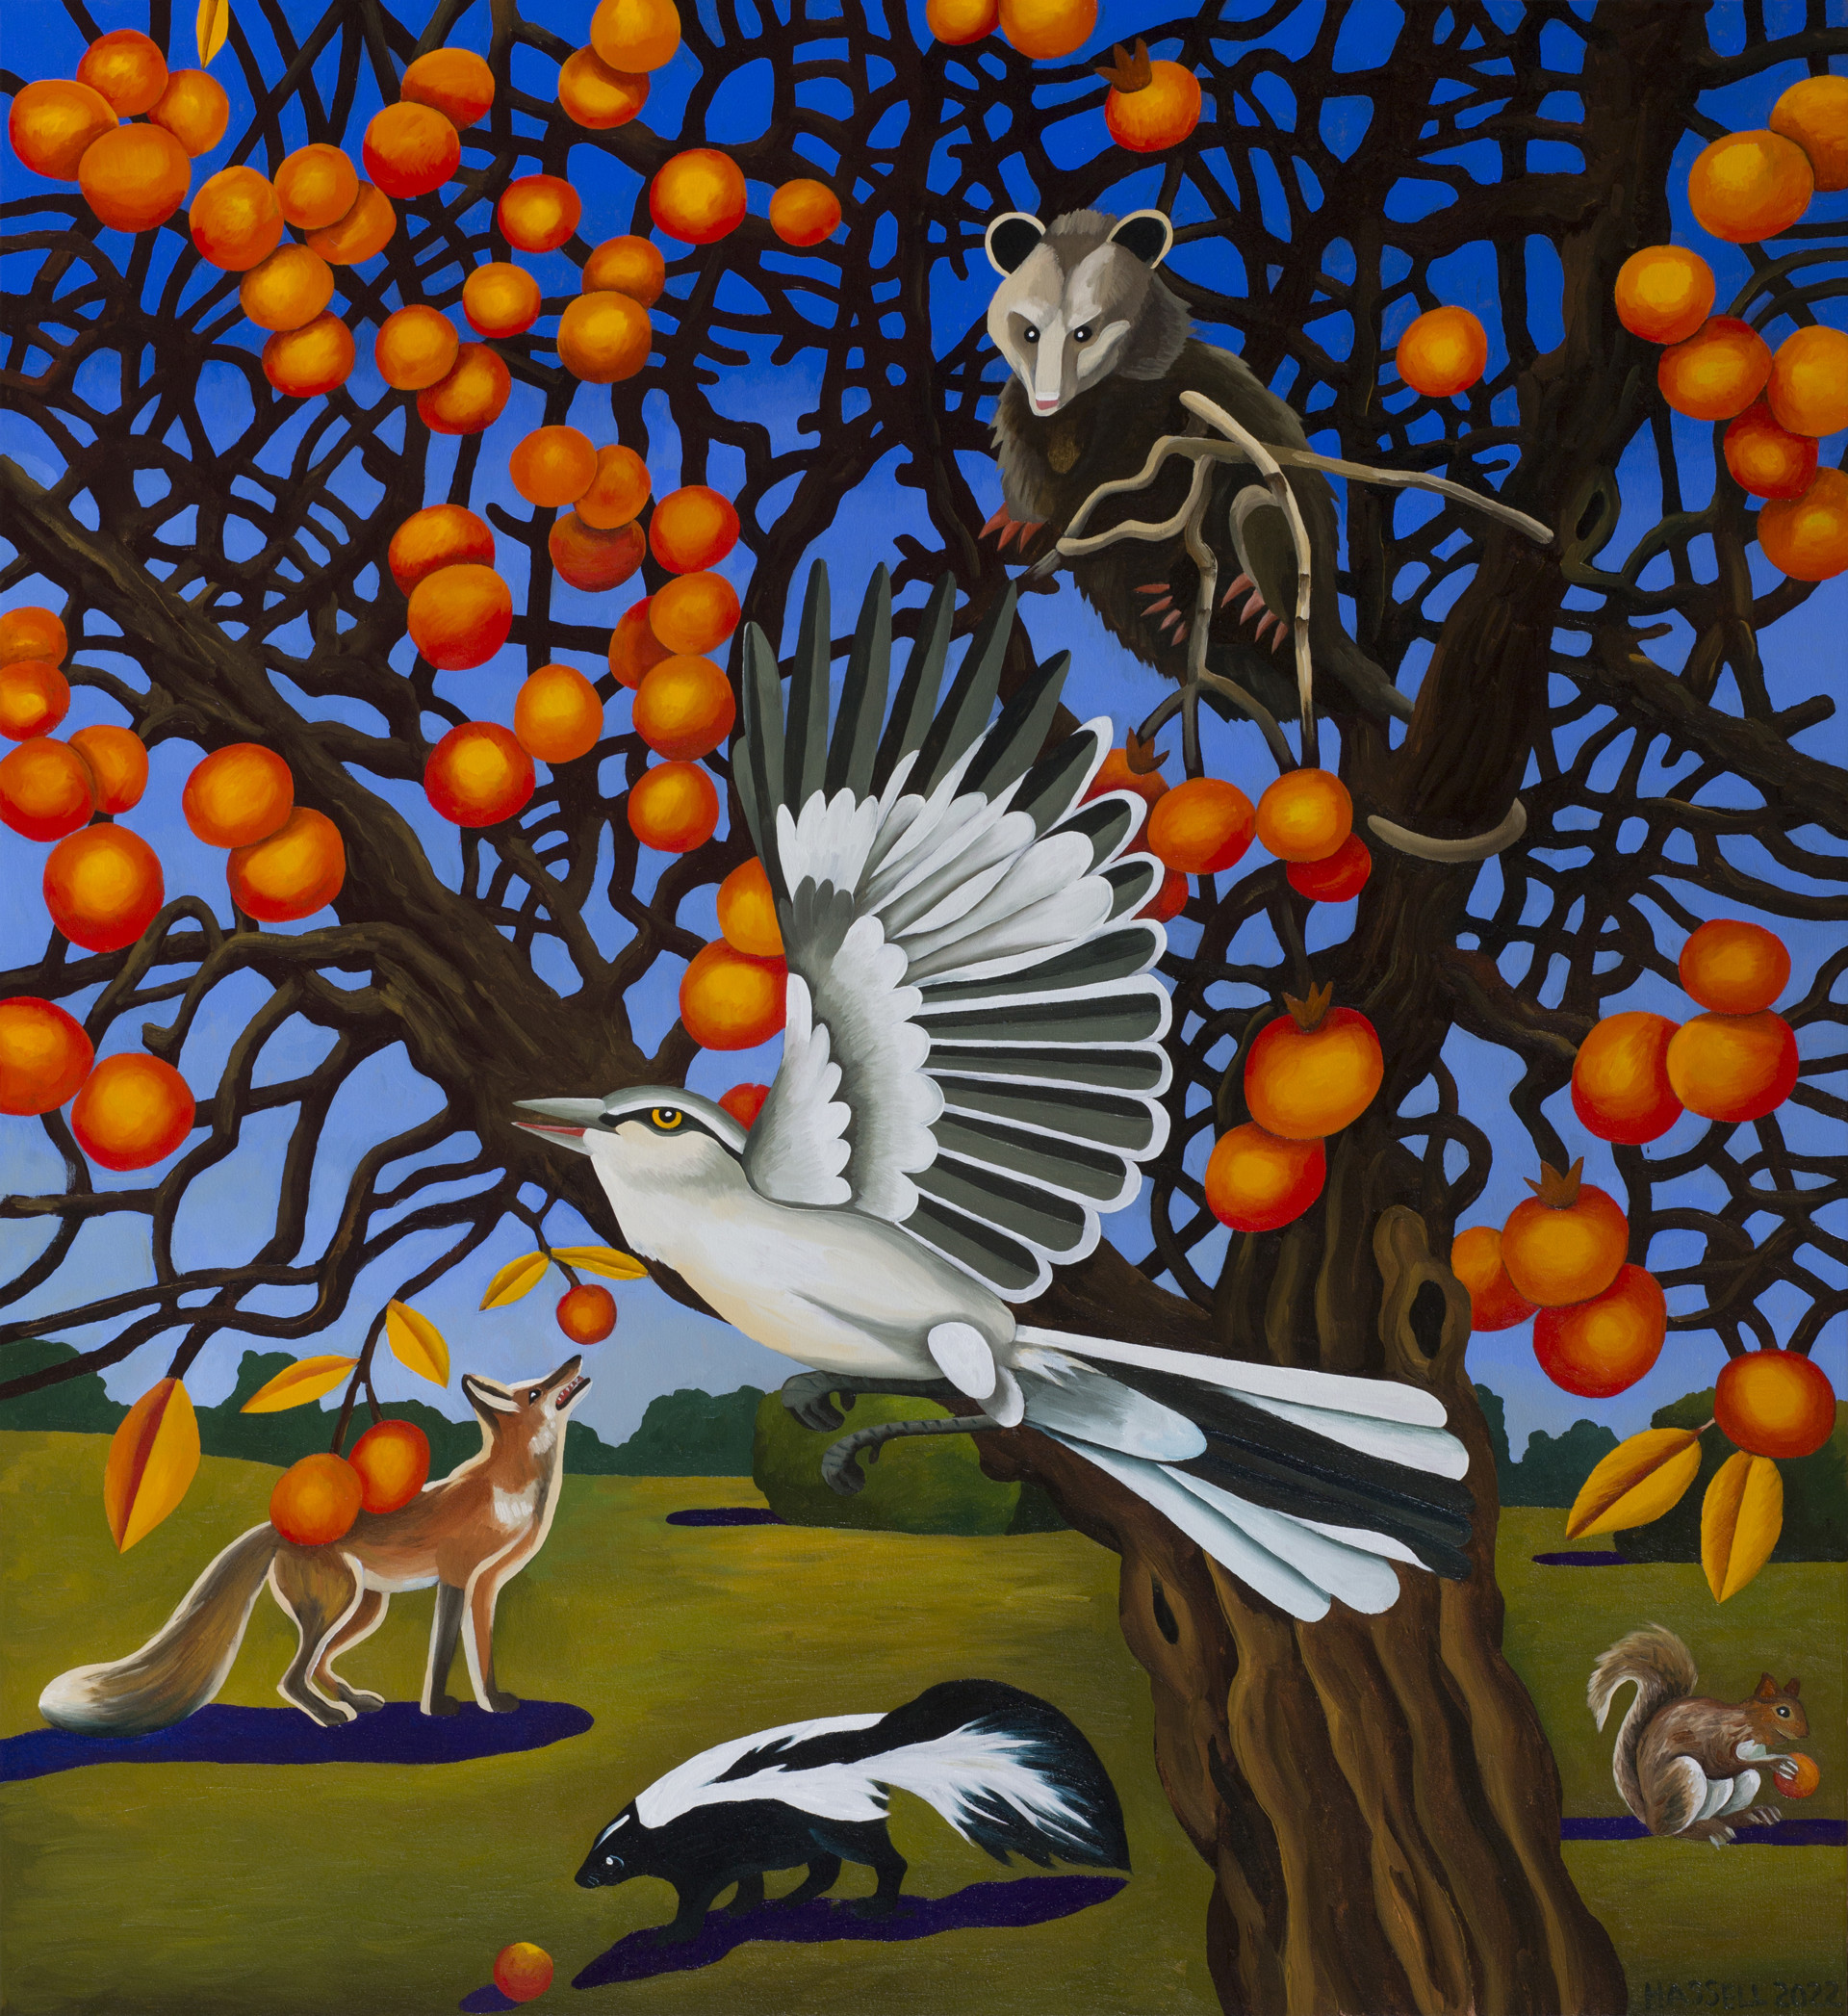 Persimmon Tree by Billy Hassell